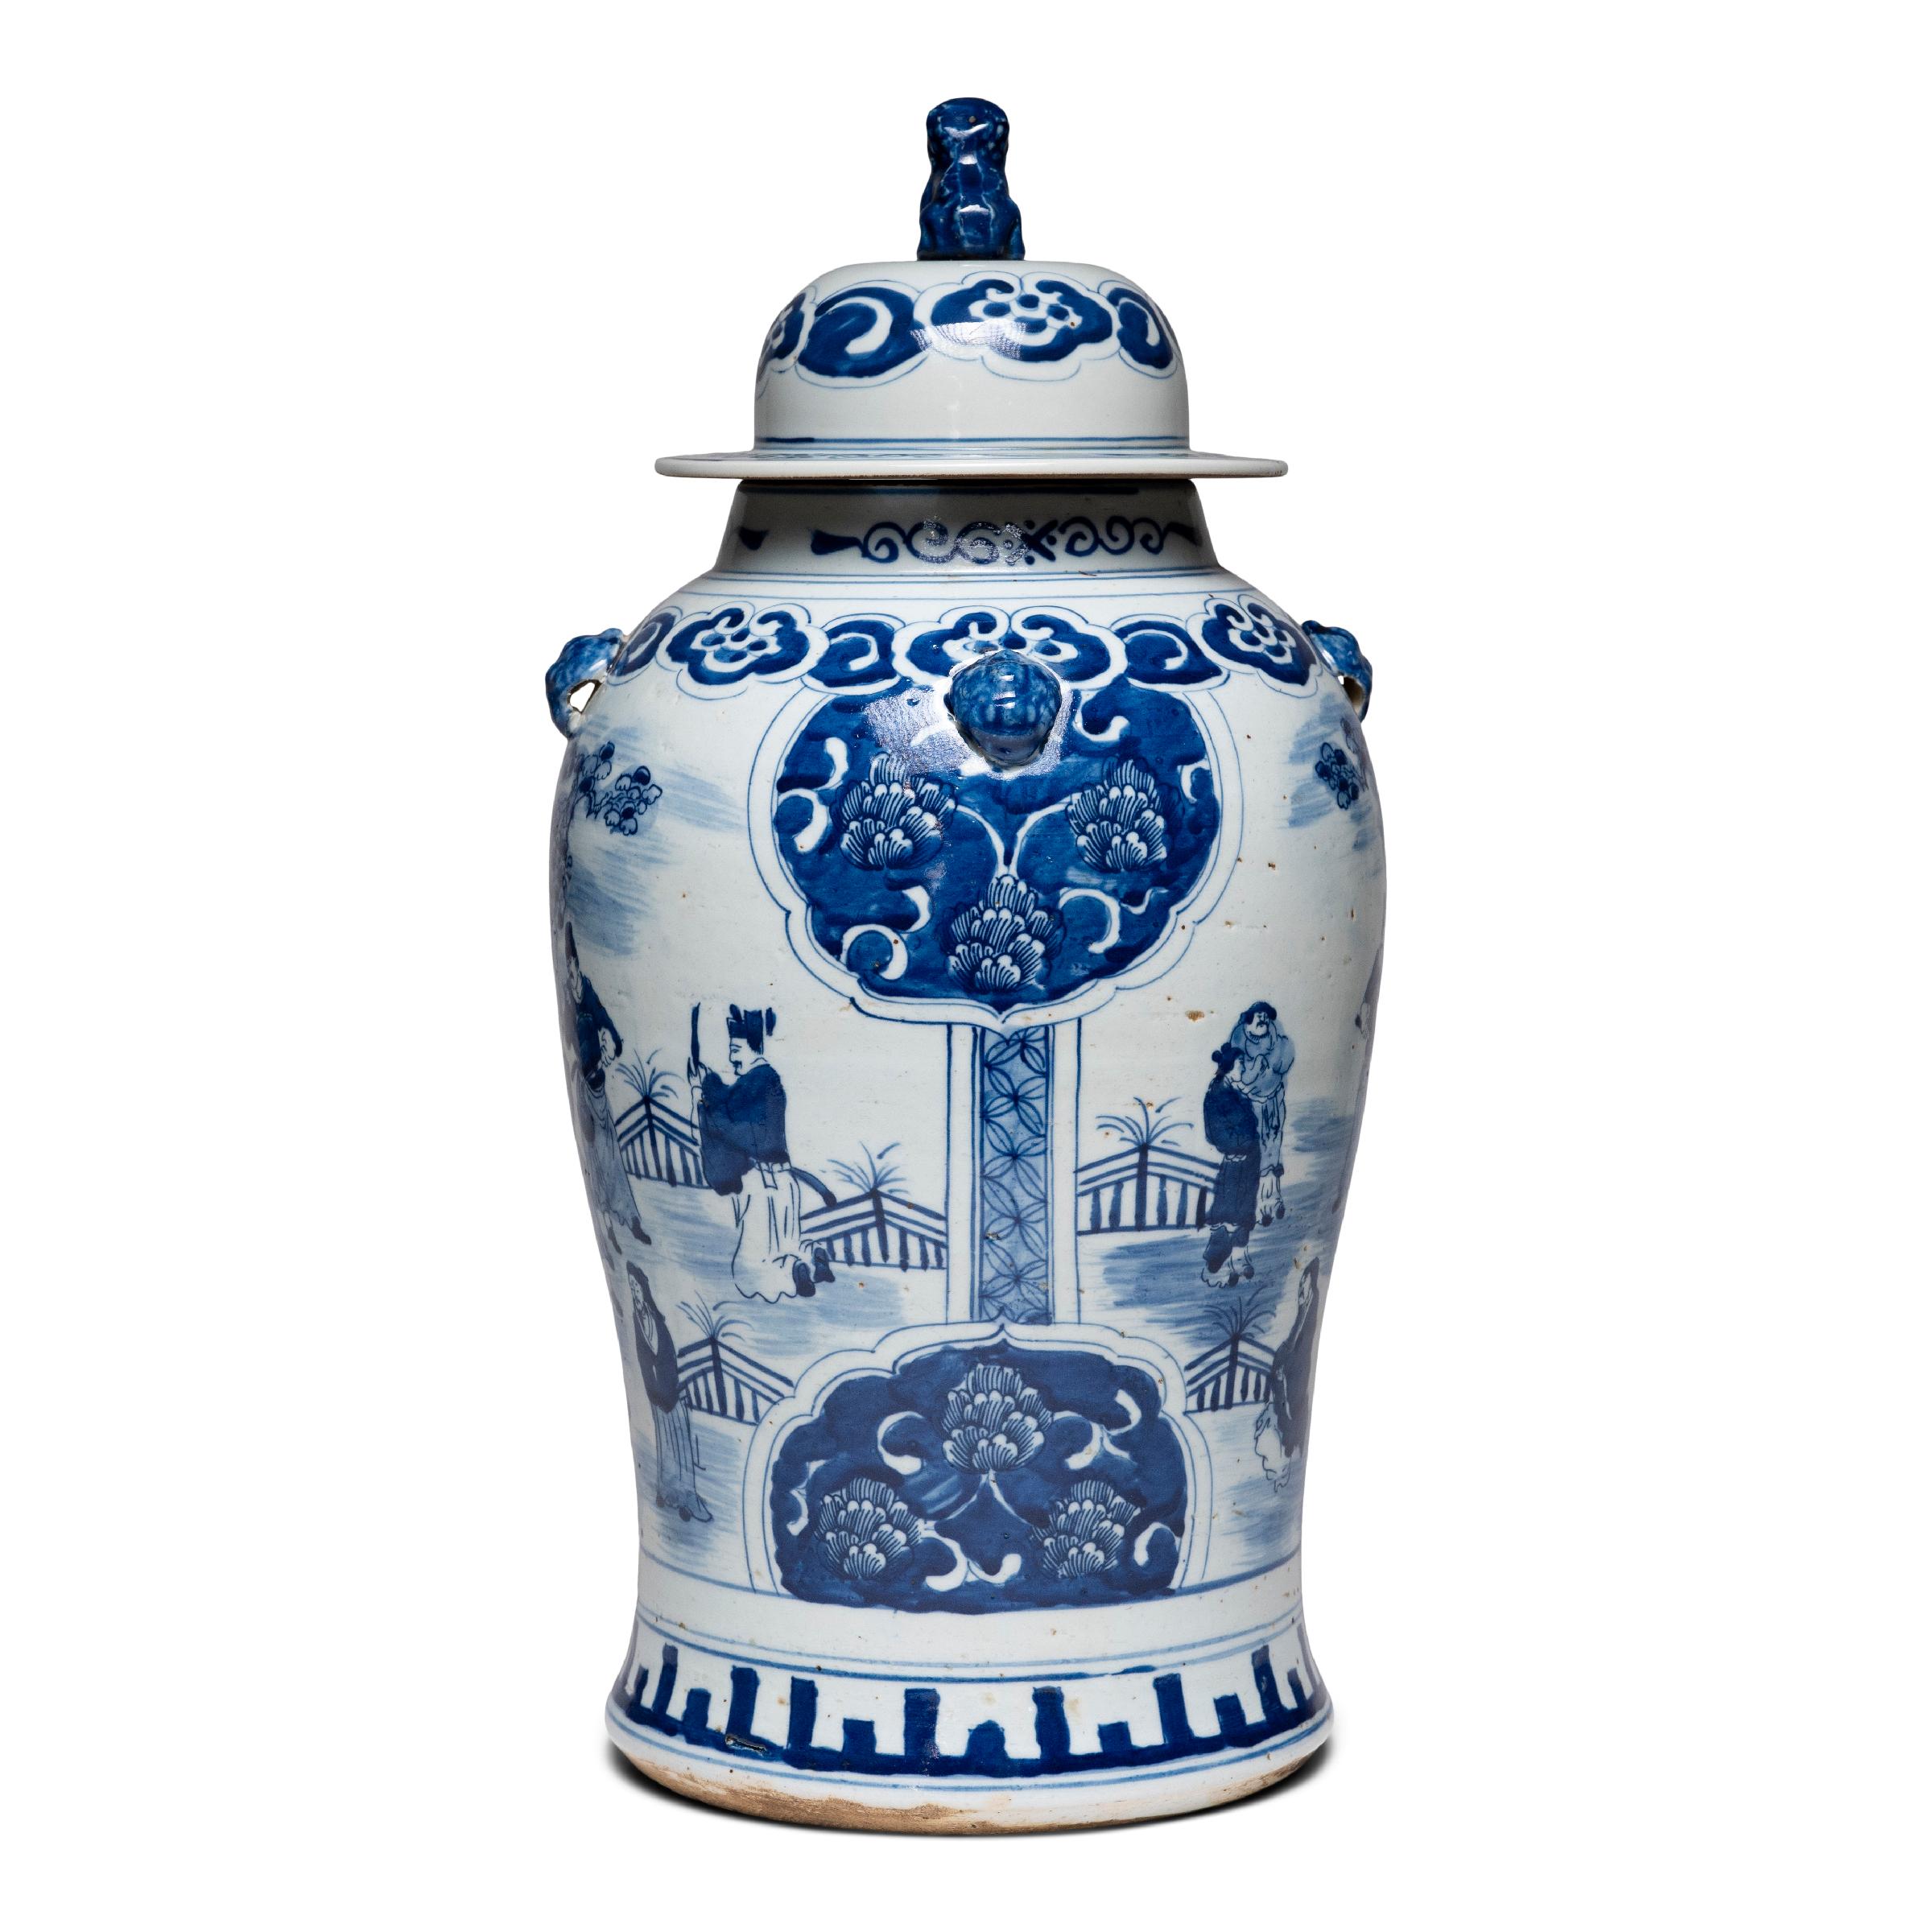 This contemporary baluster jar from artisans in Jiangxi province continues the centuries-old tradition of Chinese blue-and-white porcelain. Also known as a ginger jar or temple jar, jars of this shape were popular with noblemen who sent them to